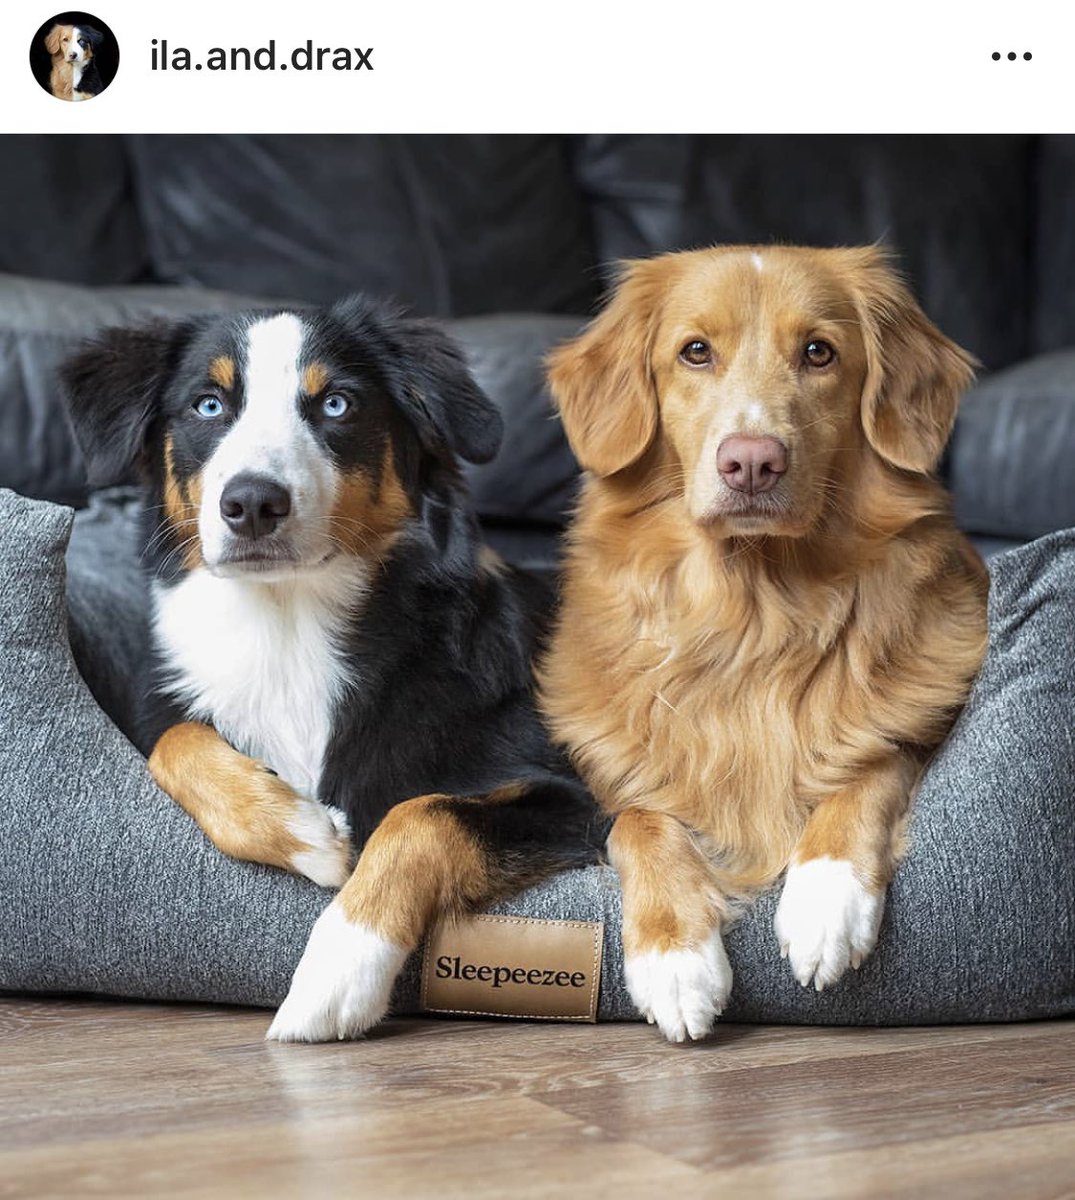 Joii Please Say Hello To Ila The Nova Scotia Duck Tolling Retriever And Drax The Miniature American Shepard These Lovely Pups Have A Passion For Adventure They Certainly Know